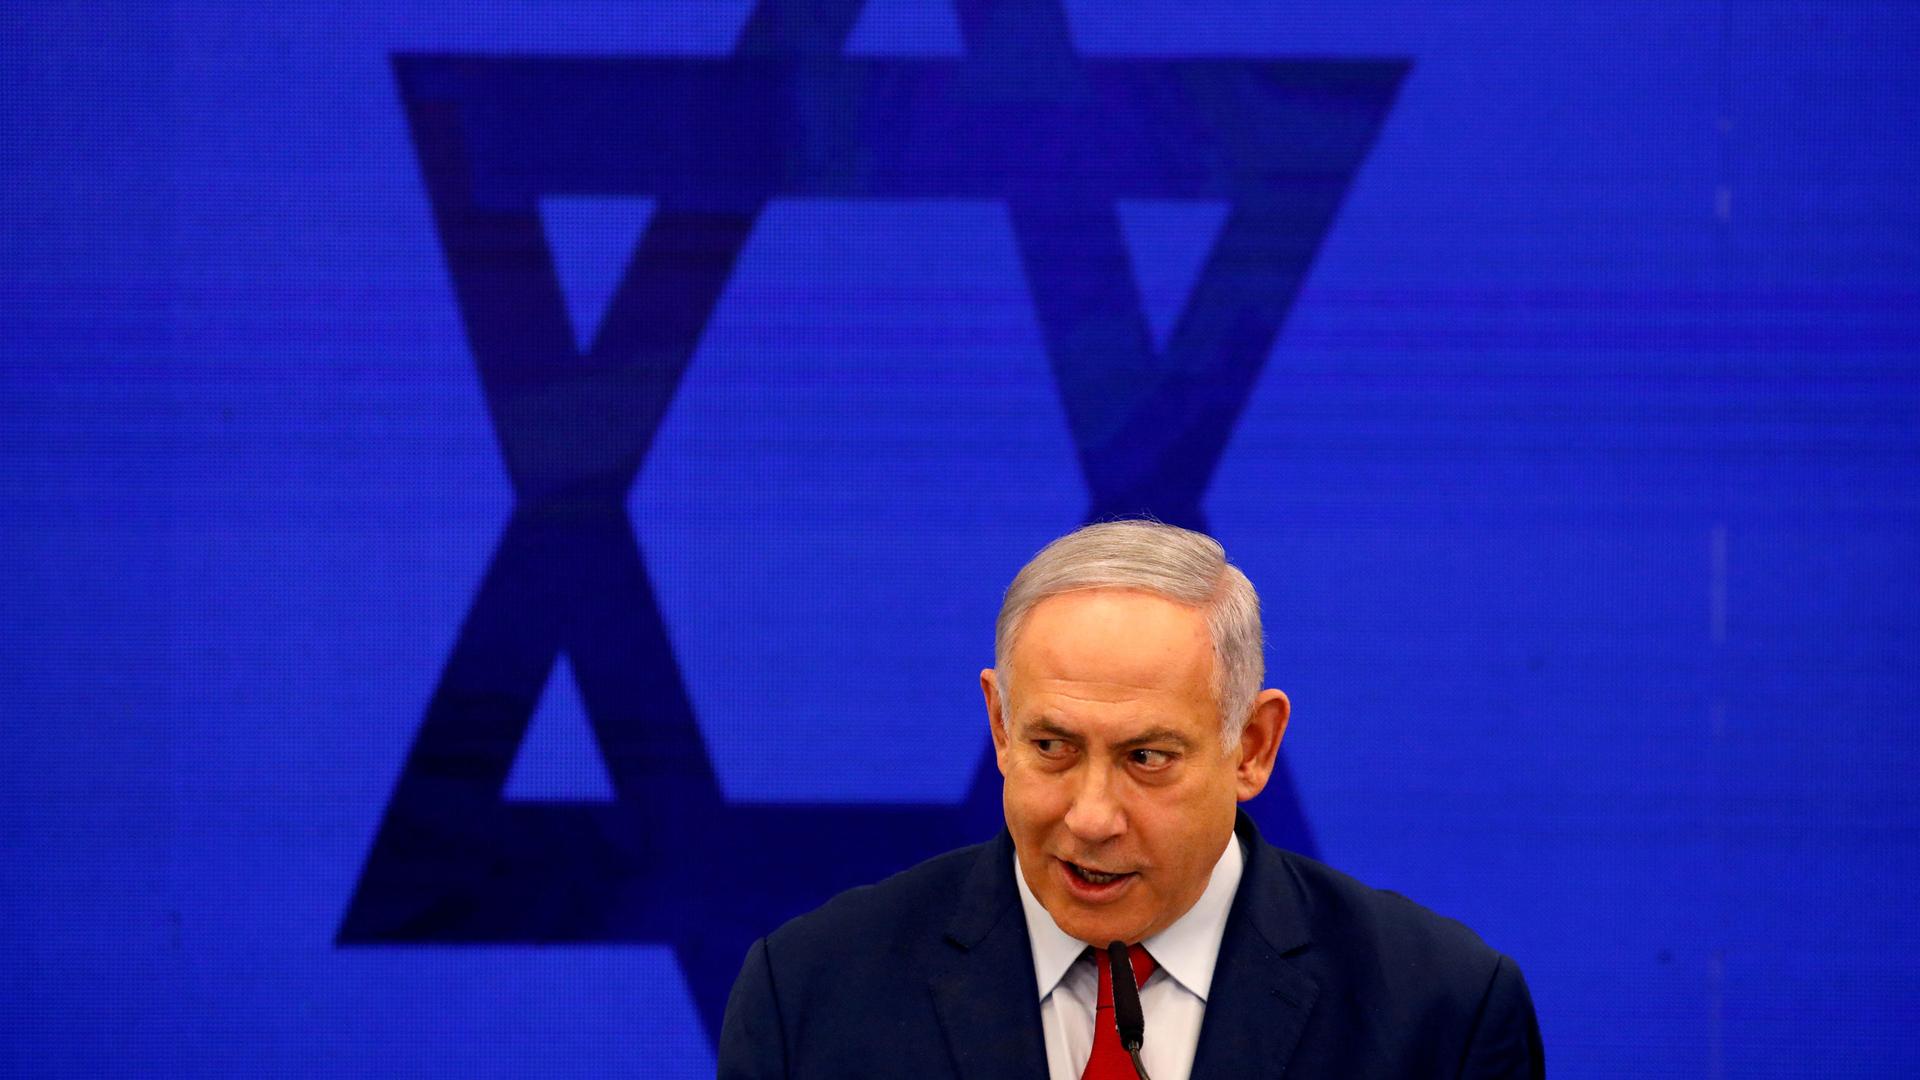 Israeli Prime Minister Benjamin Netanyahu is shown wearing a dark suit and red tie with the Star of David behind him.